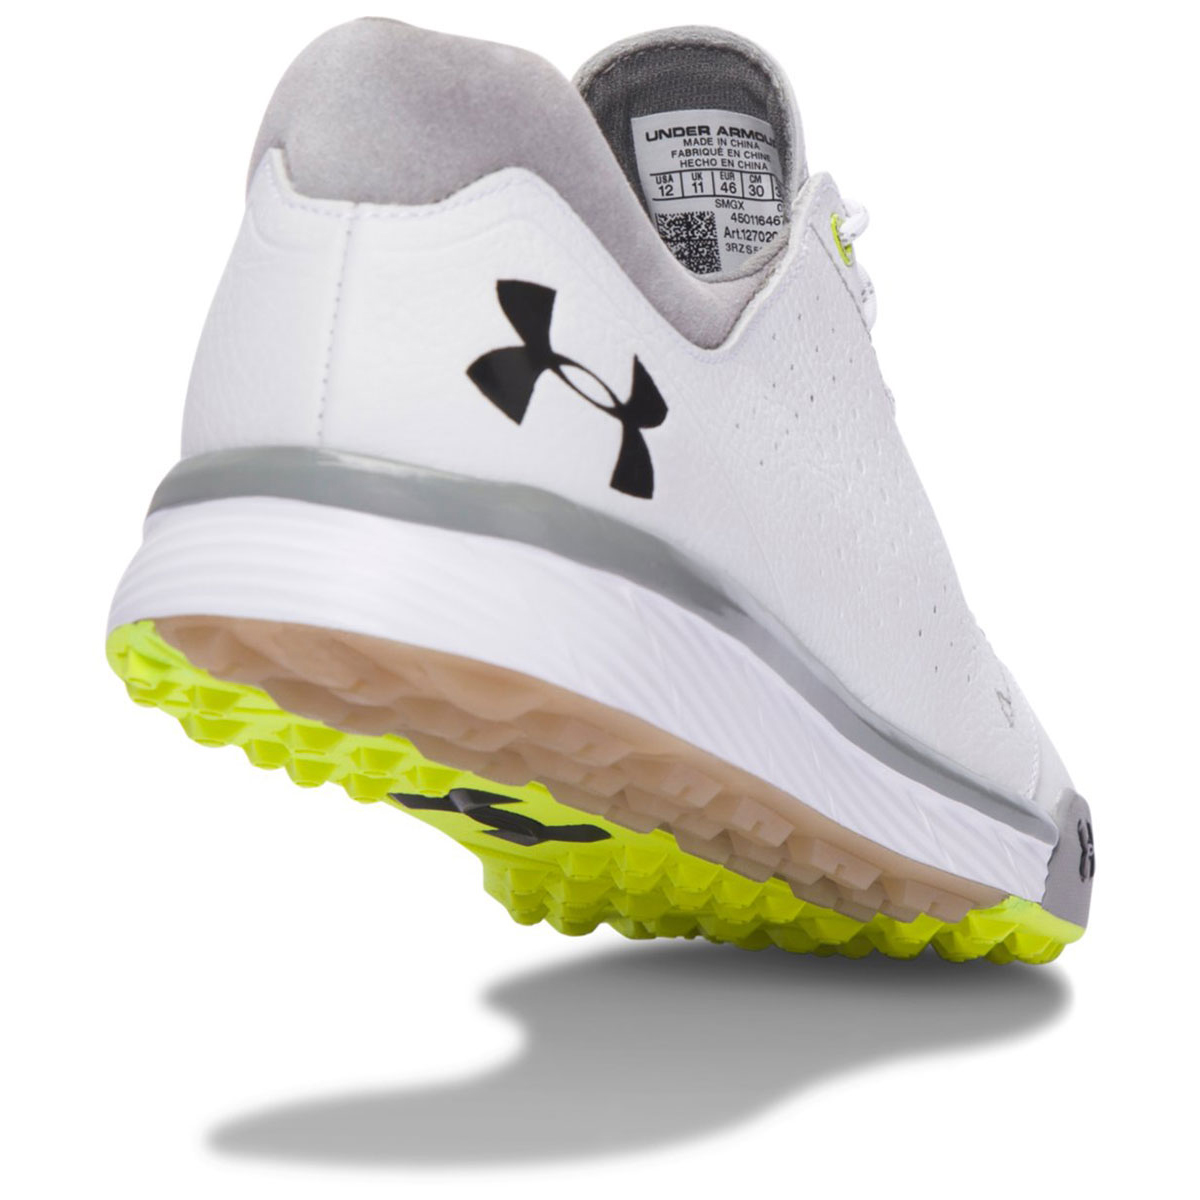 under armour smgx golf shoes